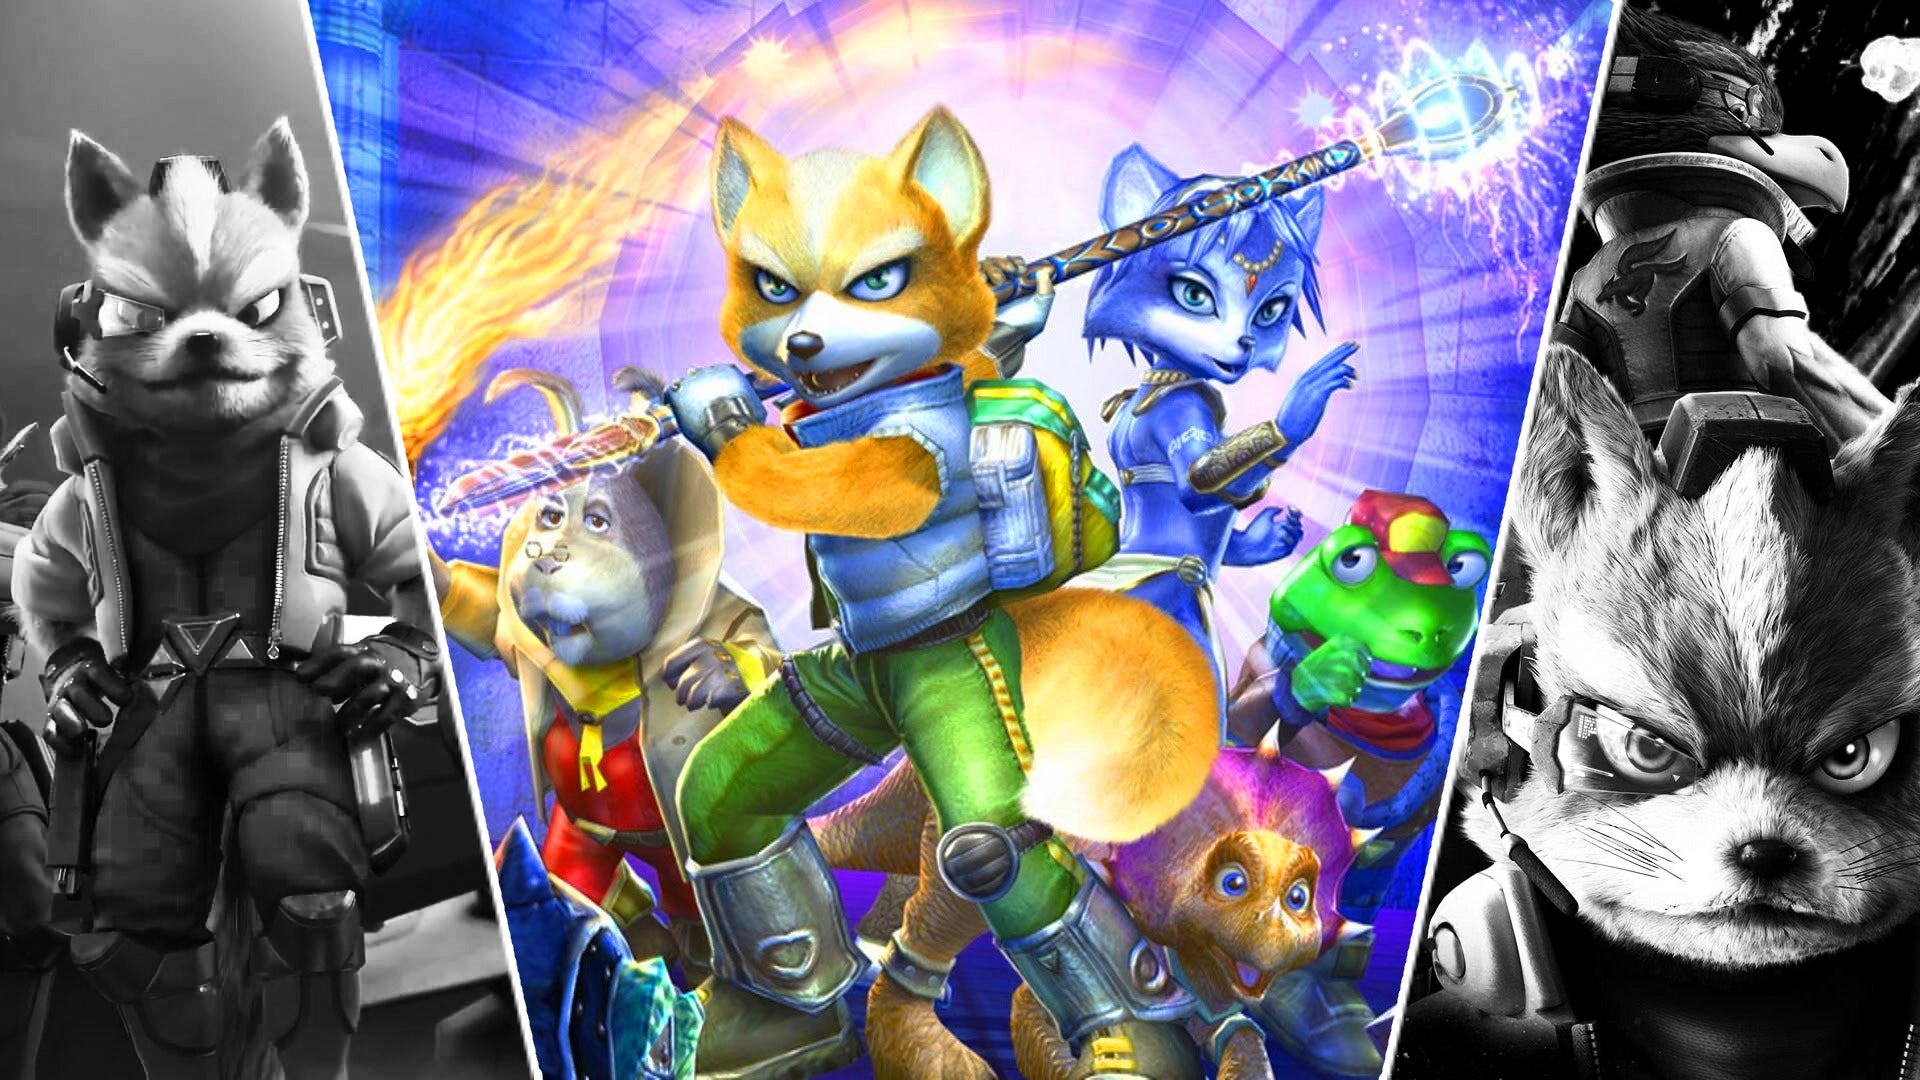 Star Fox Zero: The Battle Begins - Video Game Animated Adaptations -  LadiesGamers